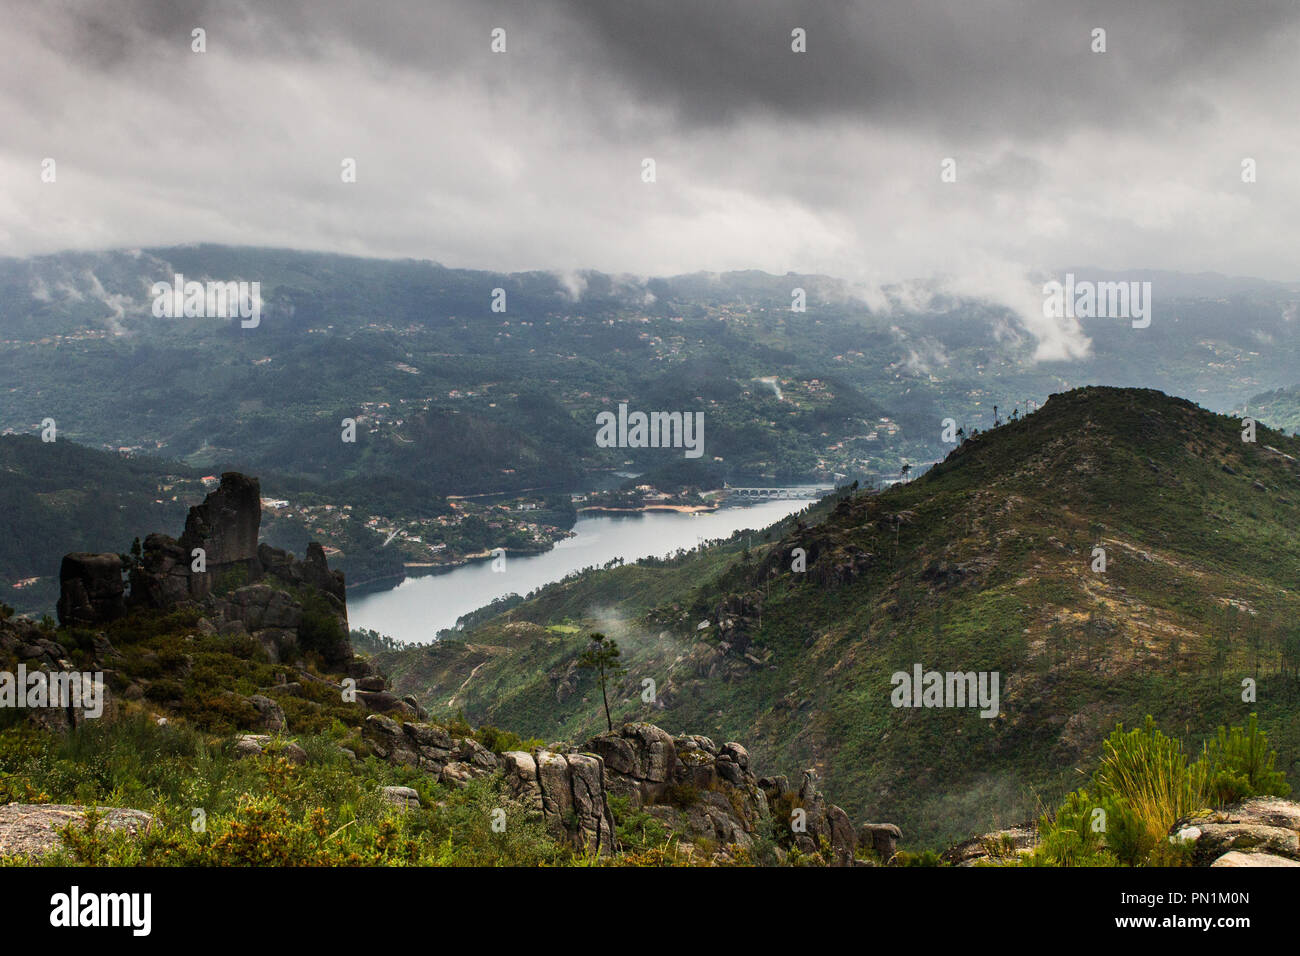 Mountain landscape during a stormy misty day. Stock Photo